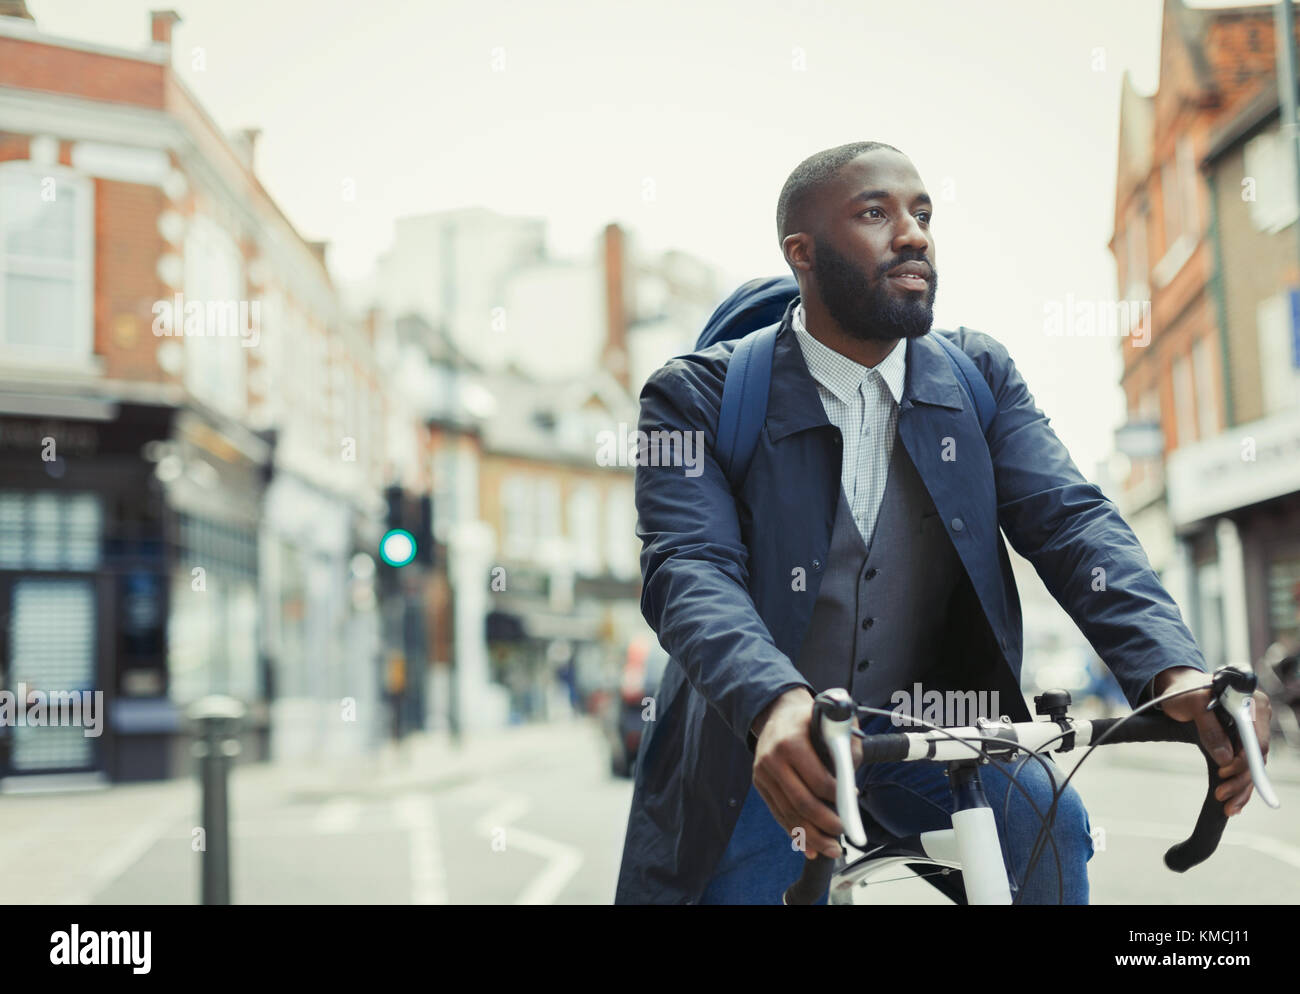 African businessman commuting, riding bicycle on urban street Stock Photo